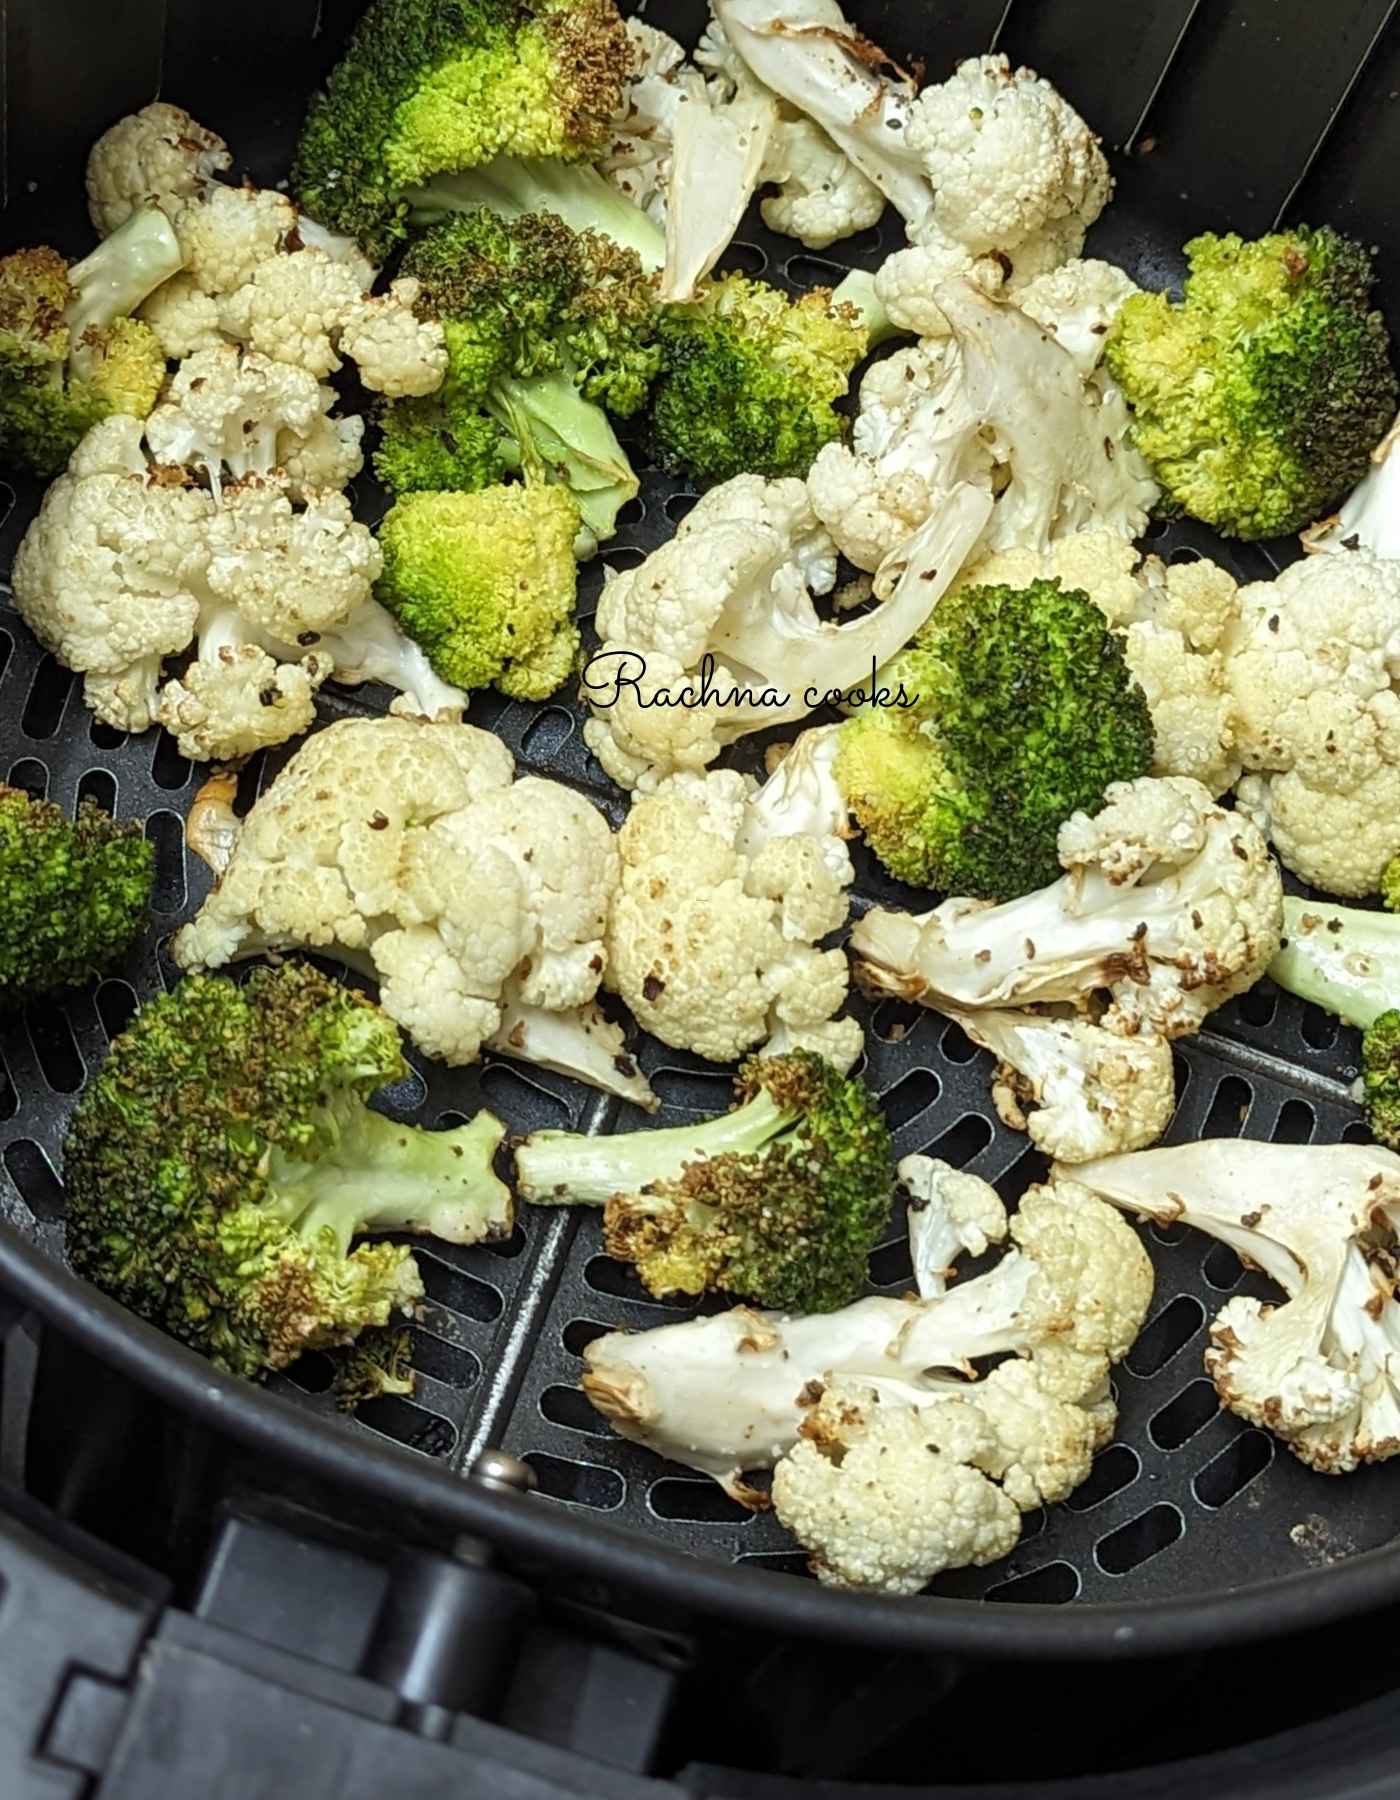 Charred cauliflower and broccoli florets in air fryer basket after air frying.